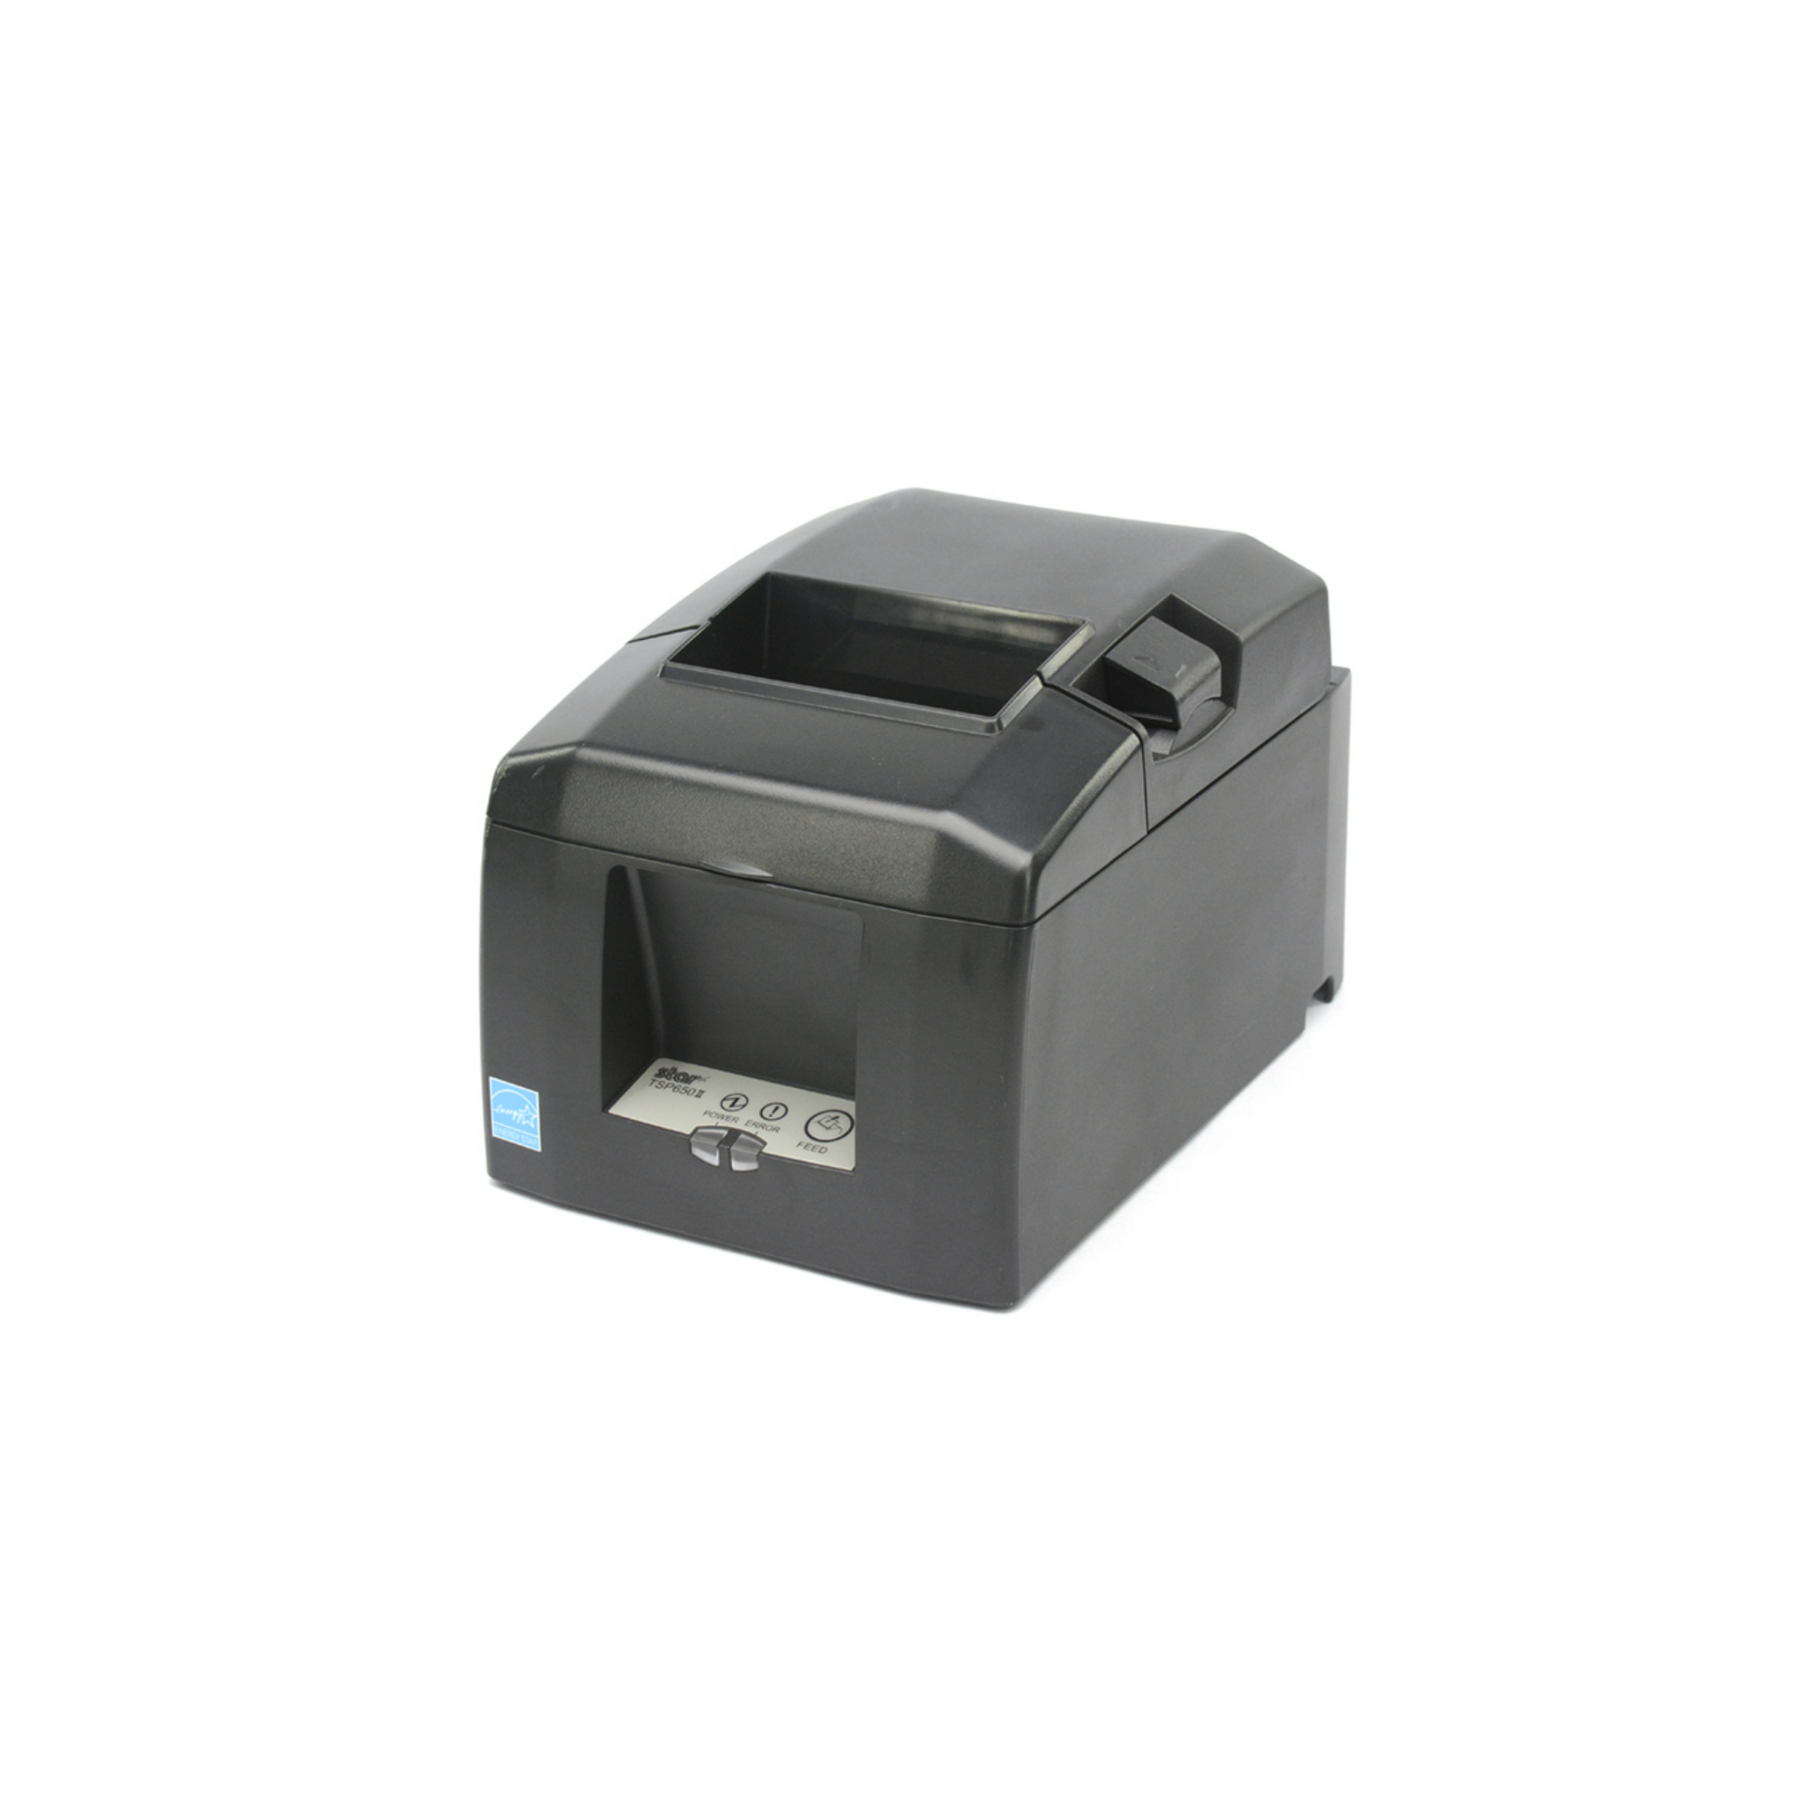 Star Micronics, TSP654IIcloudPRNT 24 - receipt printer (Ethernet Cable Not Included)